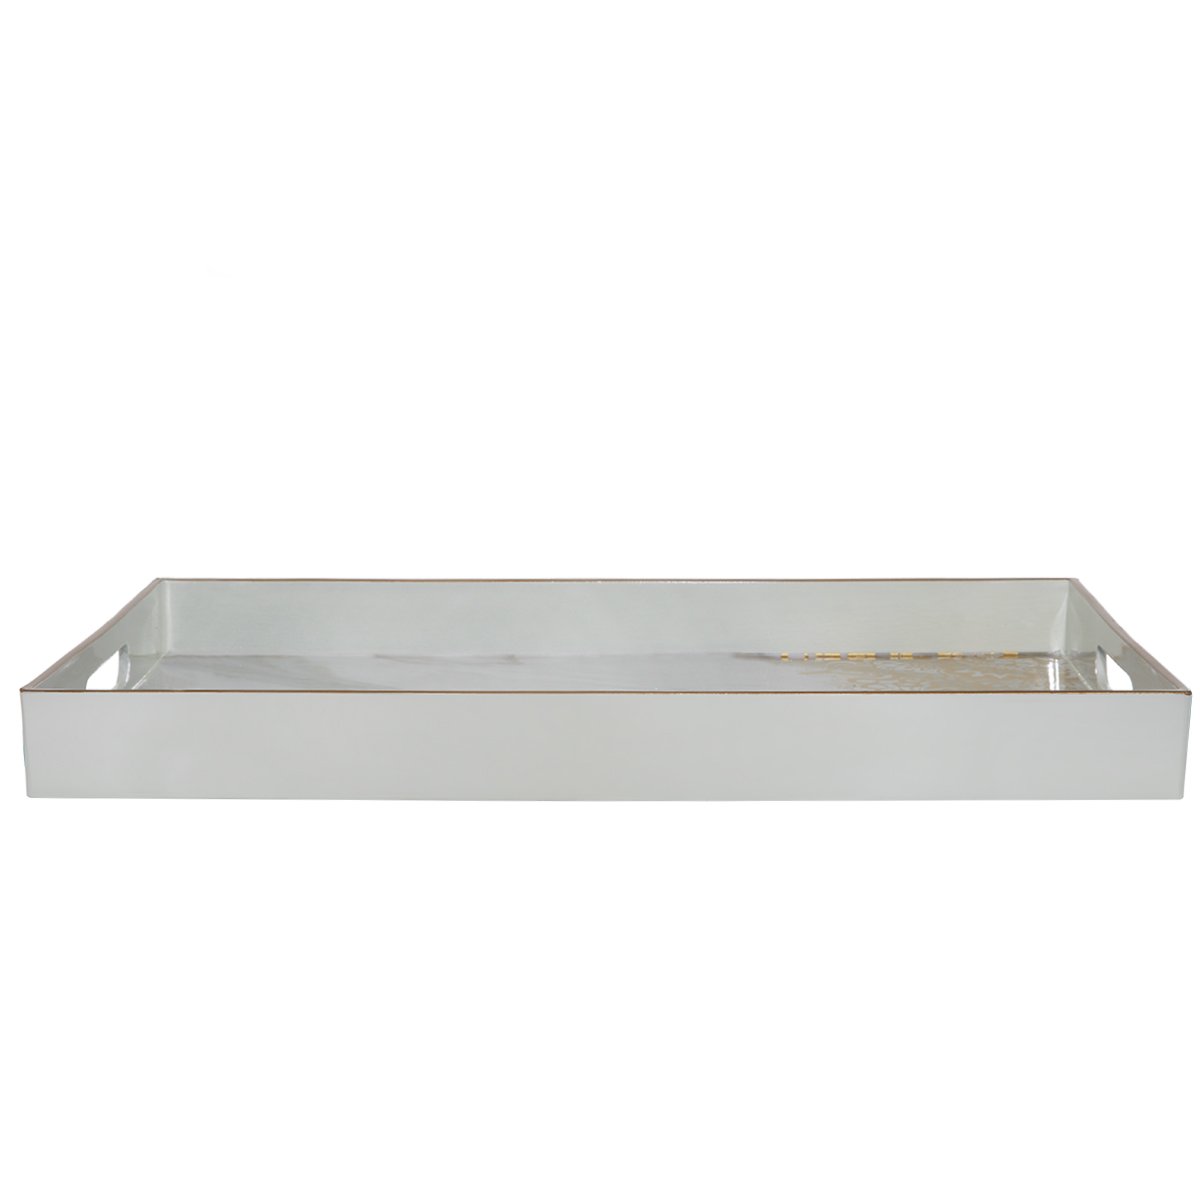 tray from Alsaifgallery,suitable for indoor and outdoor use, made